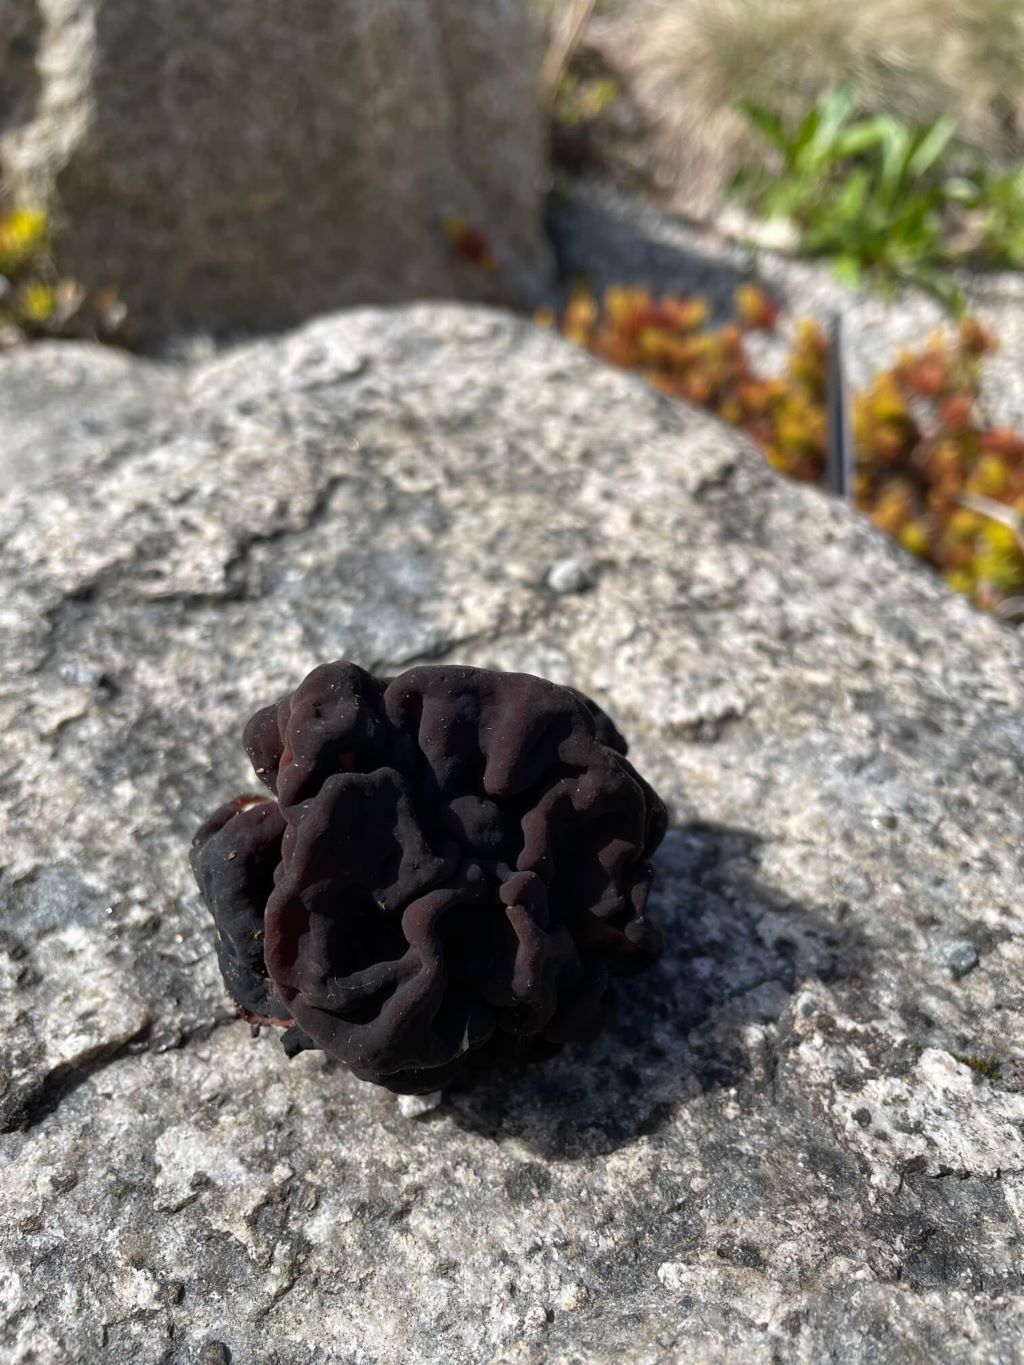 A photo of a black, velvety mushroom that resembles a brain is perched on top of a boulder, likely abandoned or dropped by wildlife.